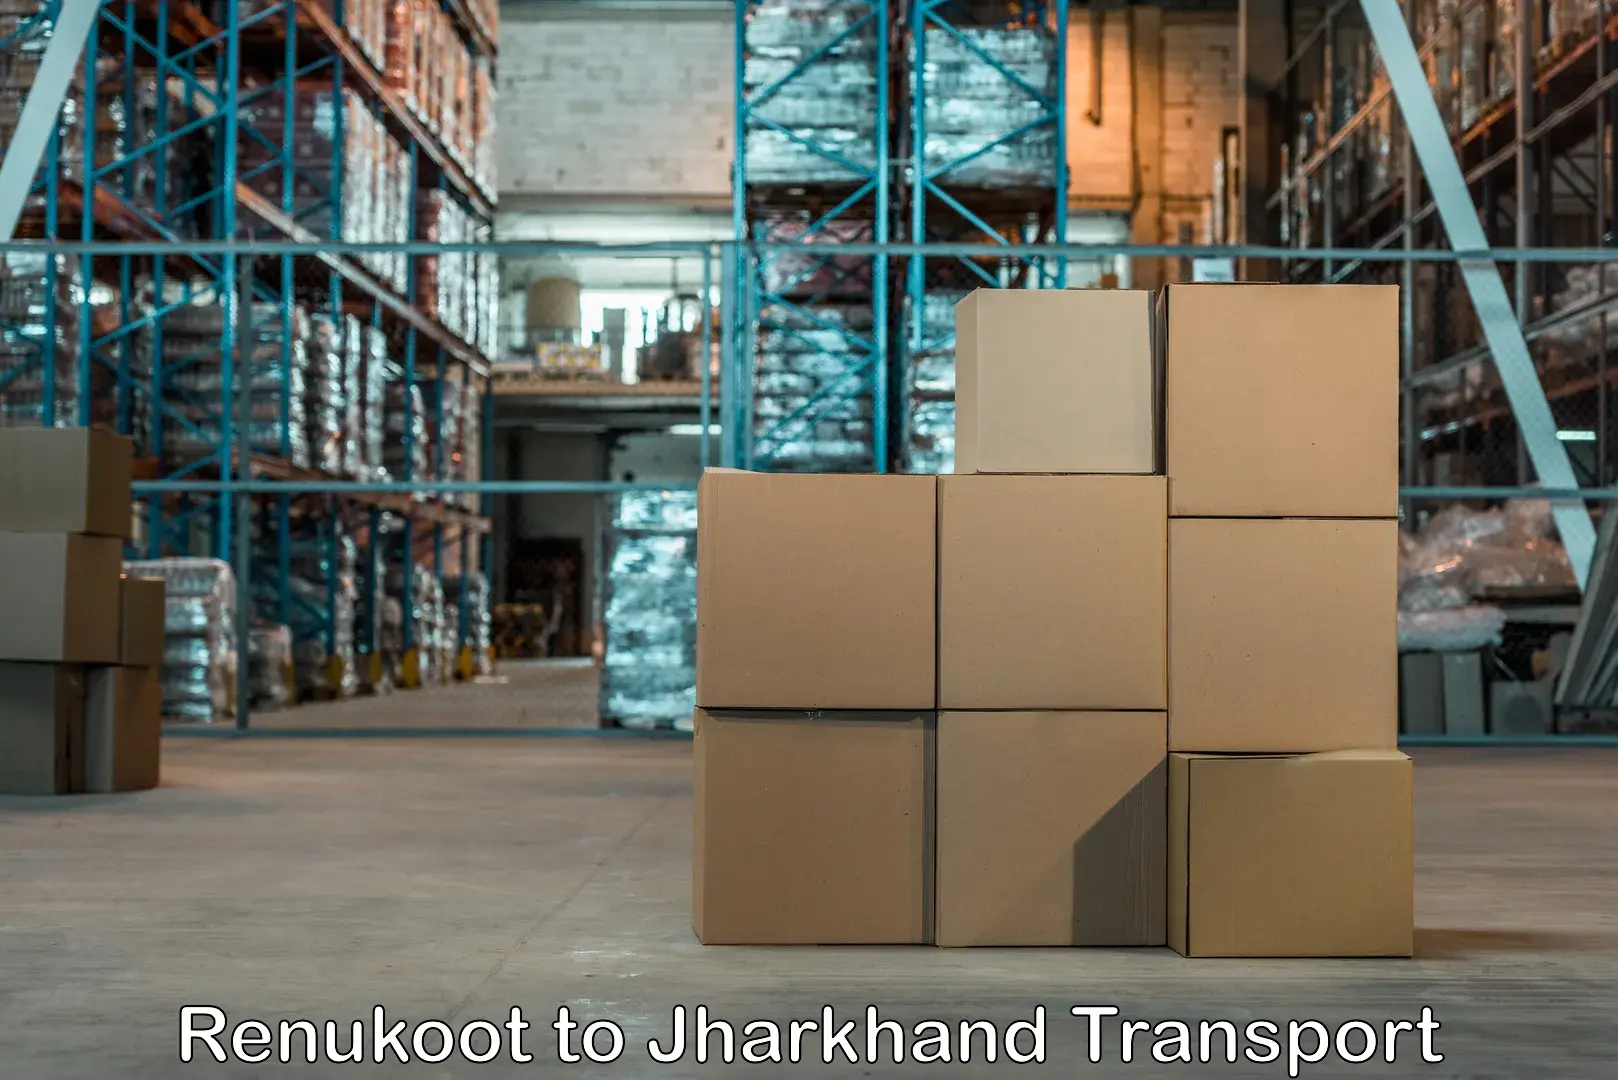 Parcel transport services Renukoot to Jharkhand